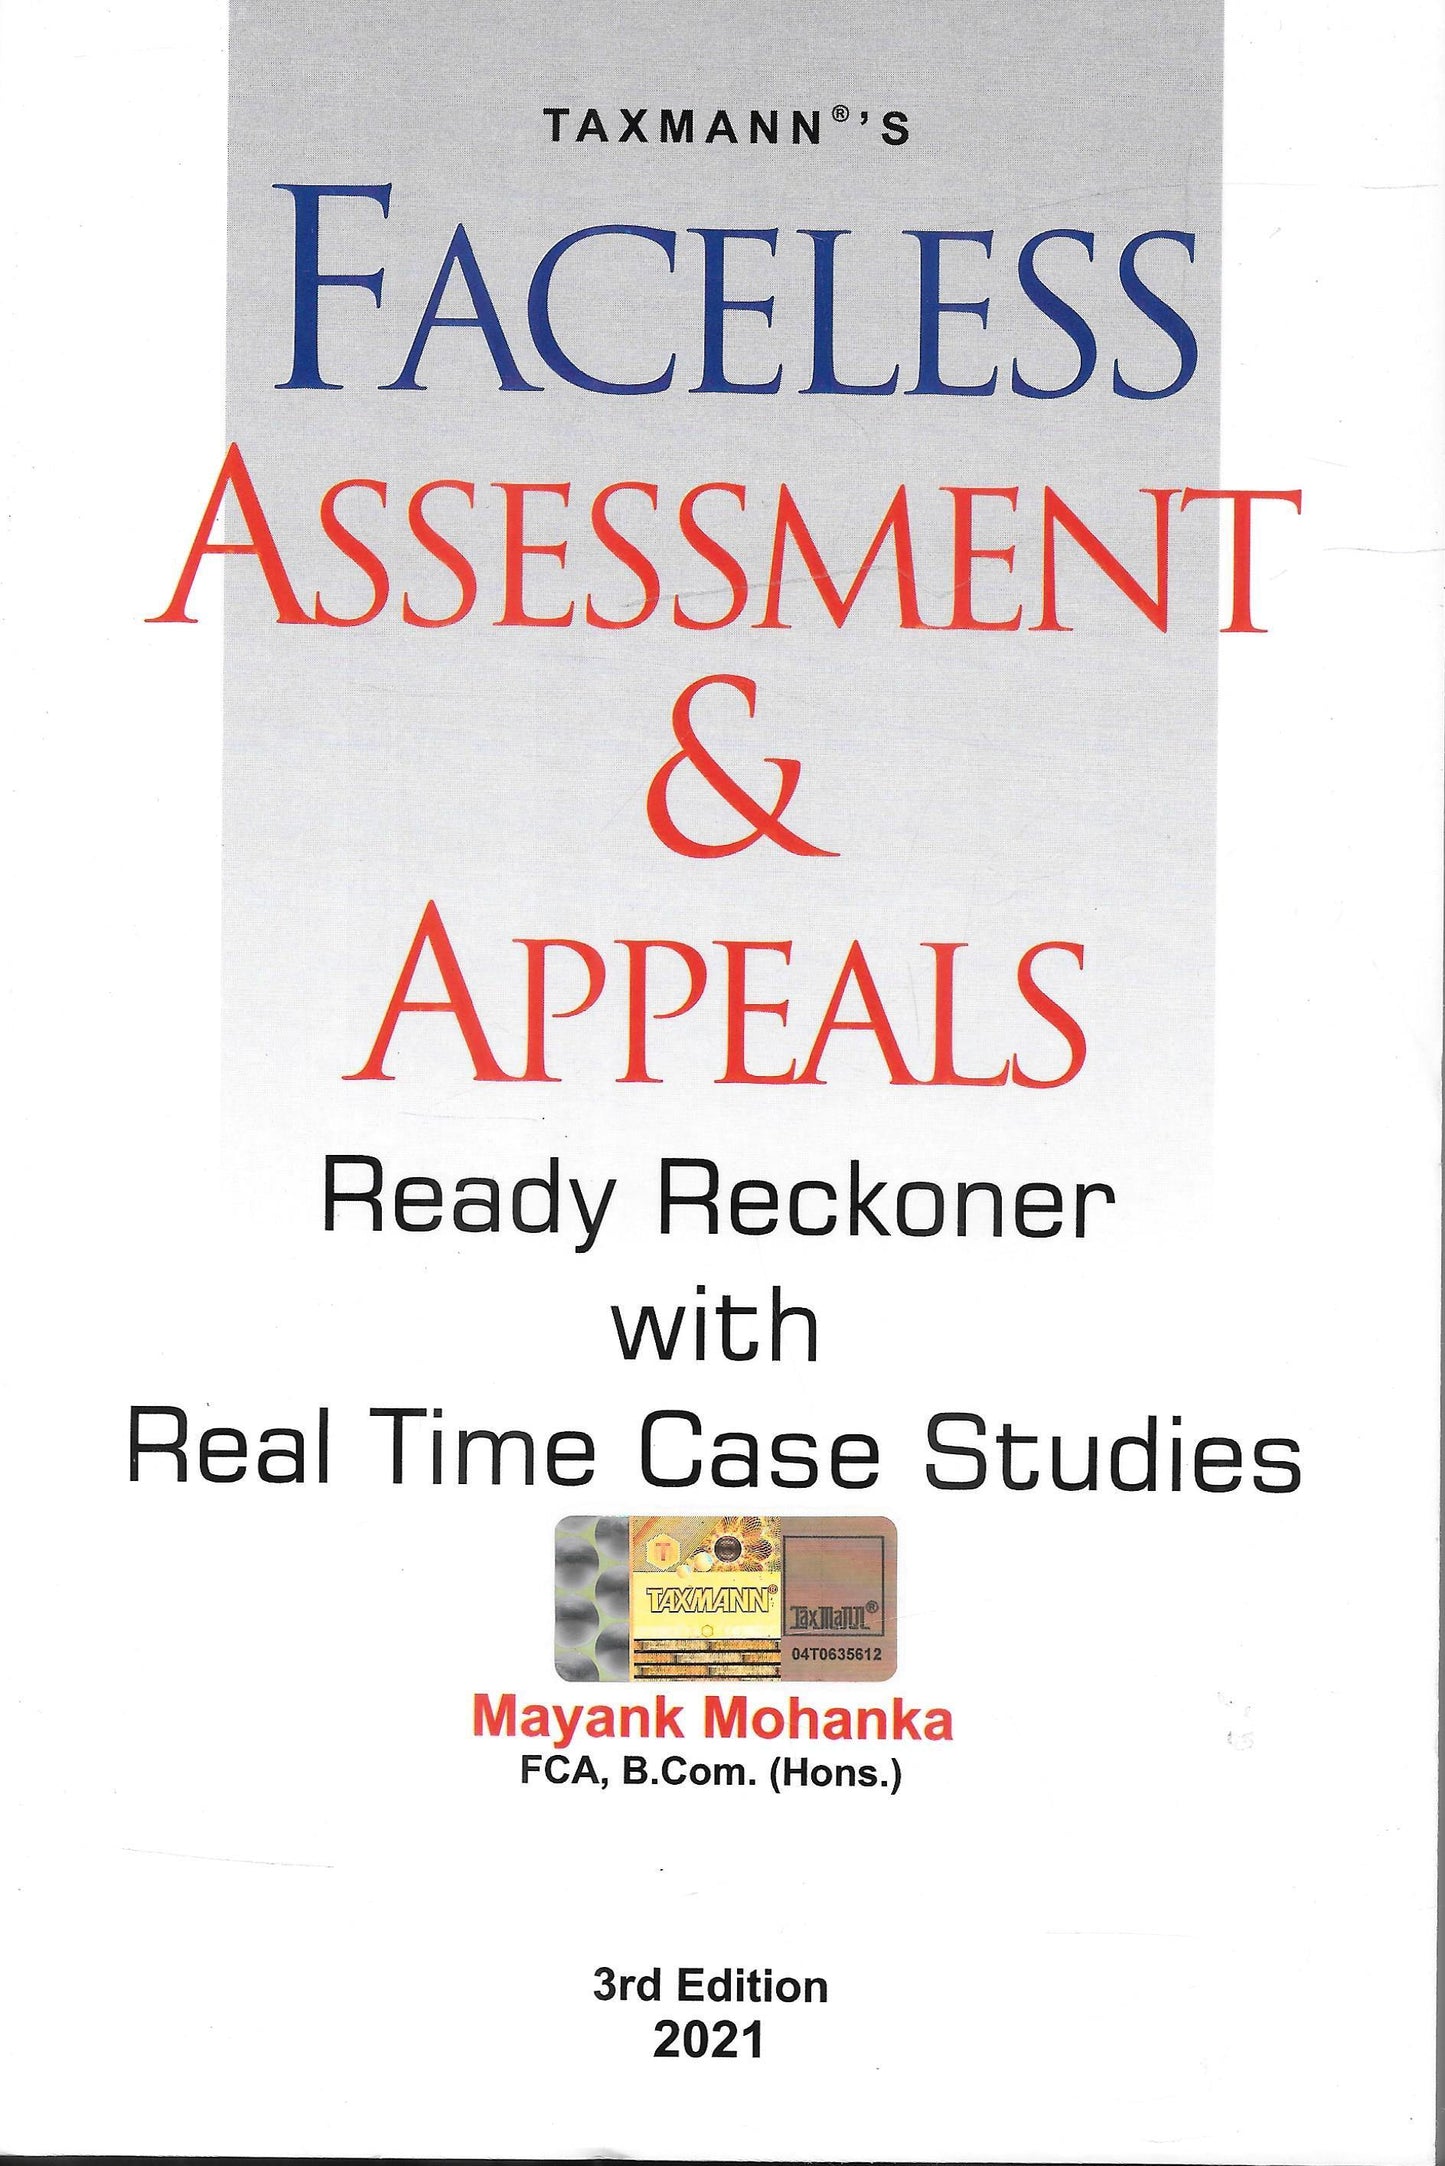 Faceless Assessment & Appeals Ready Reckoner With Real Time Case Studies